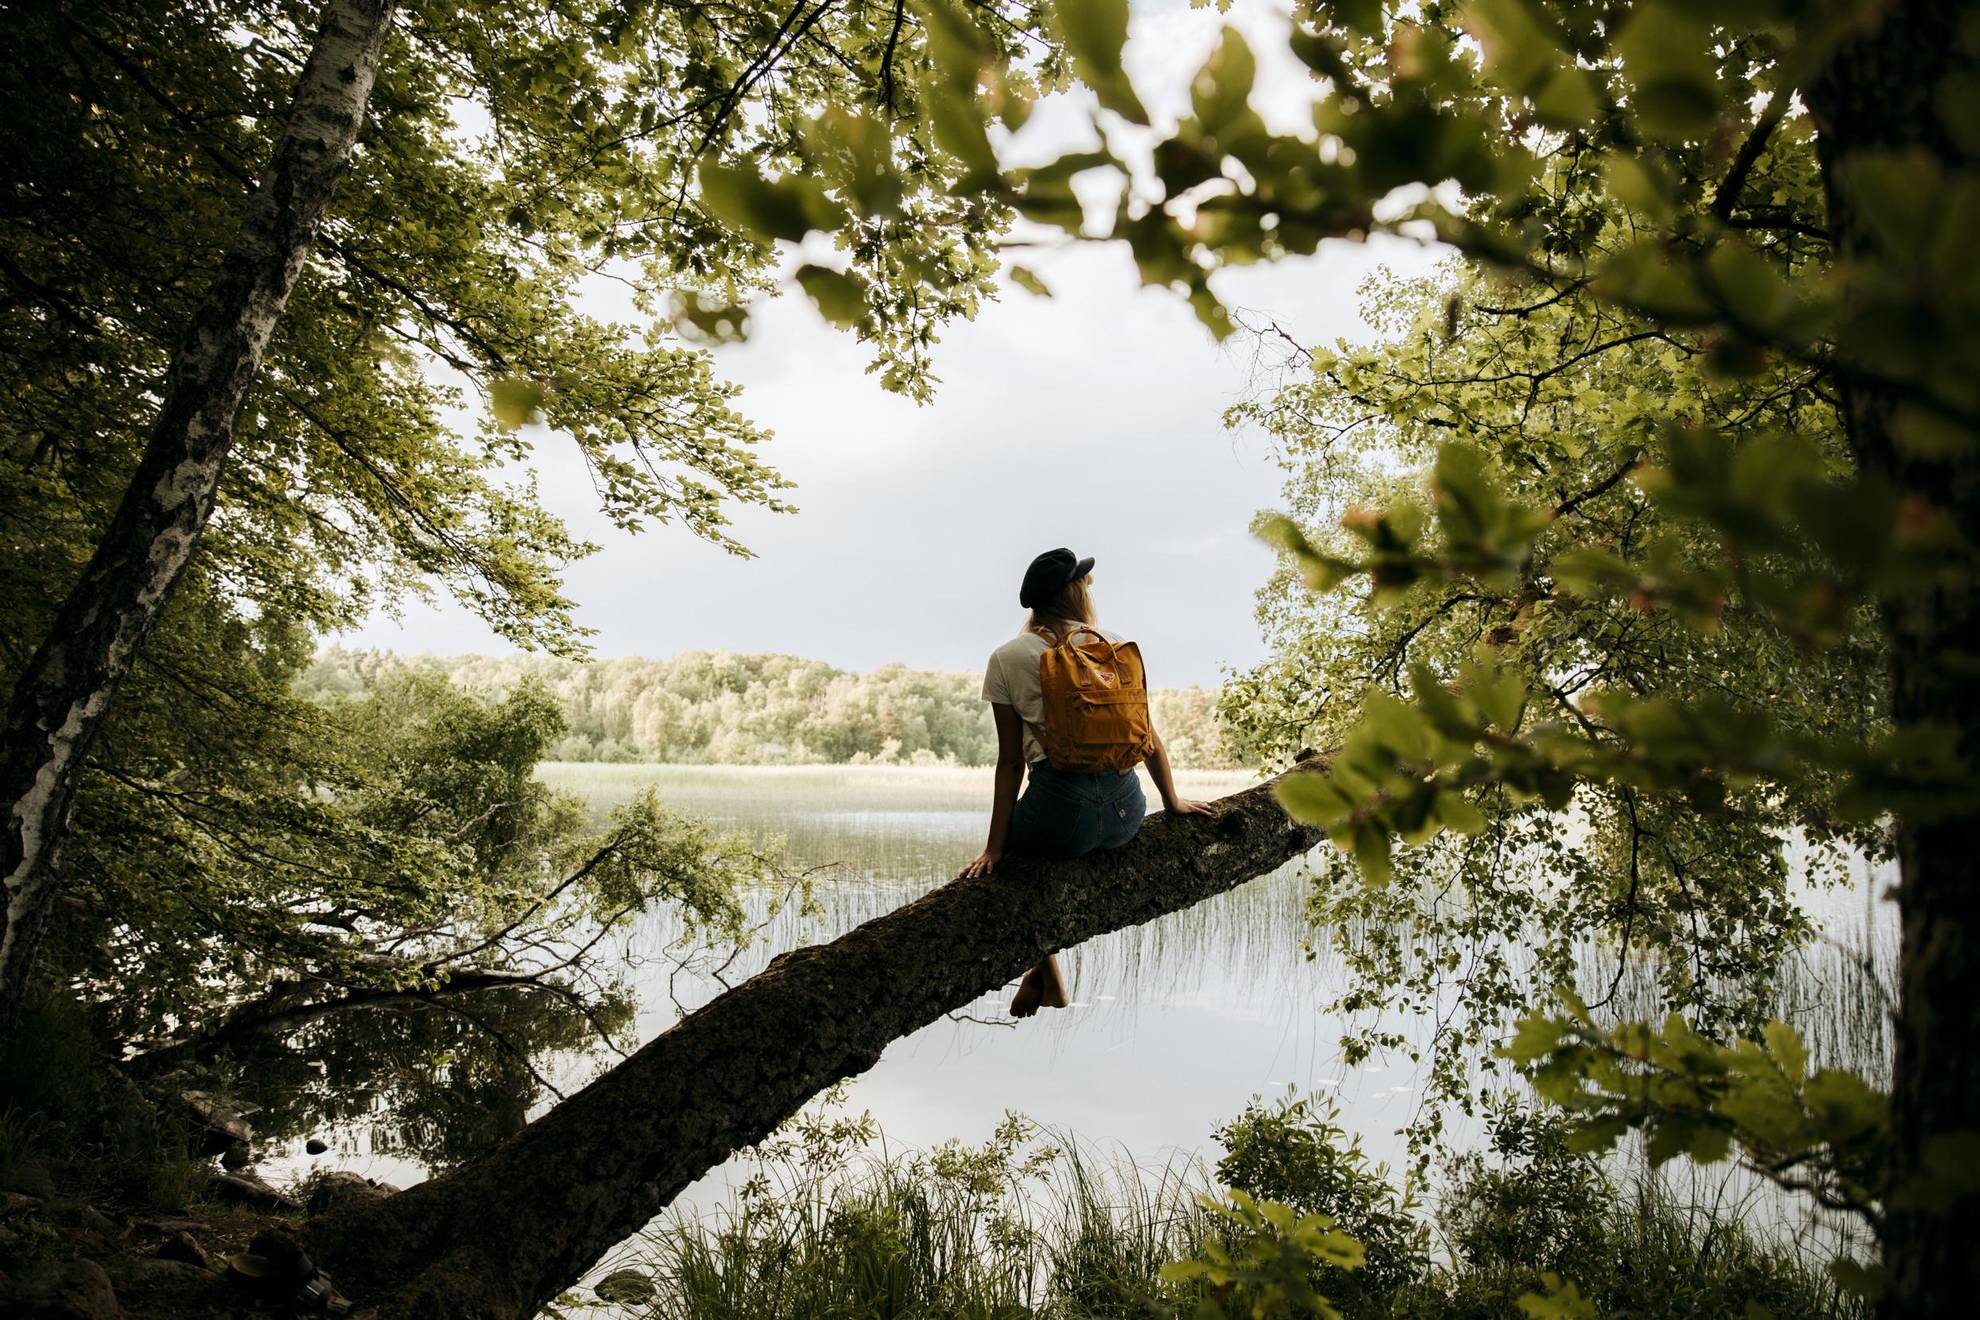 A person with a backpack sits on a three looking at a lake.